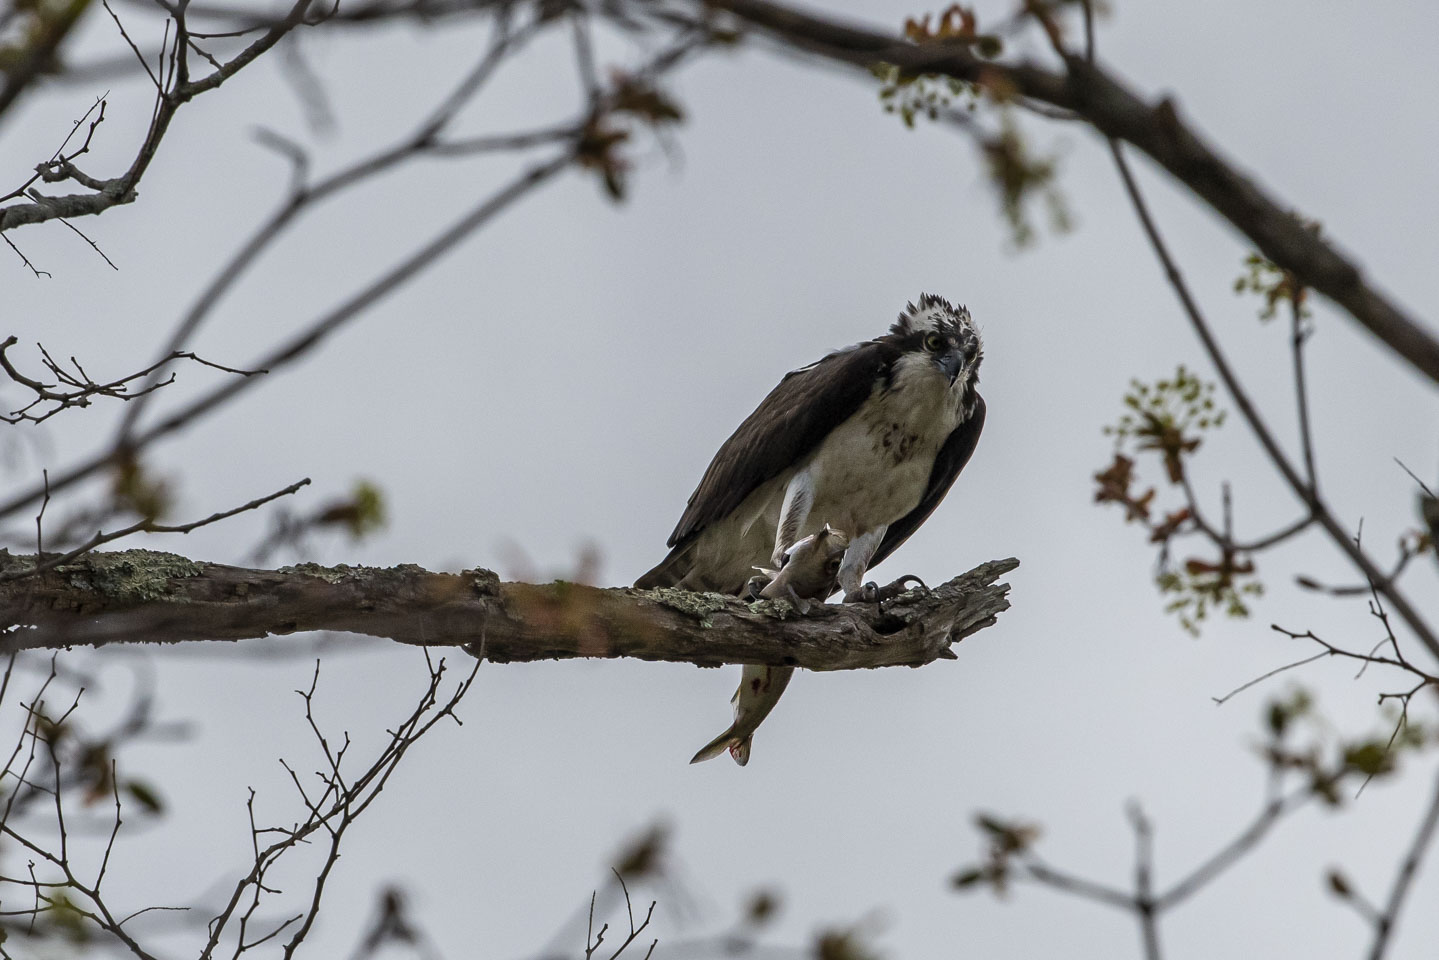 Osprey in a tree, holding a fish